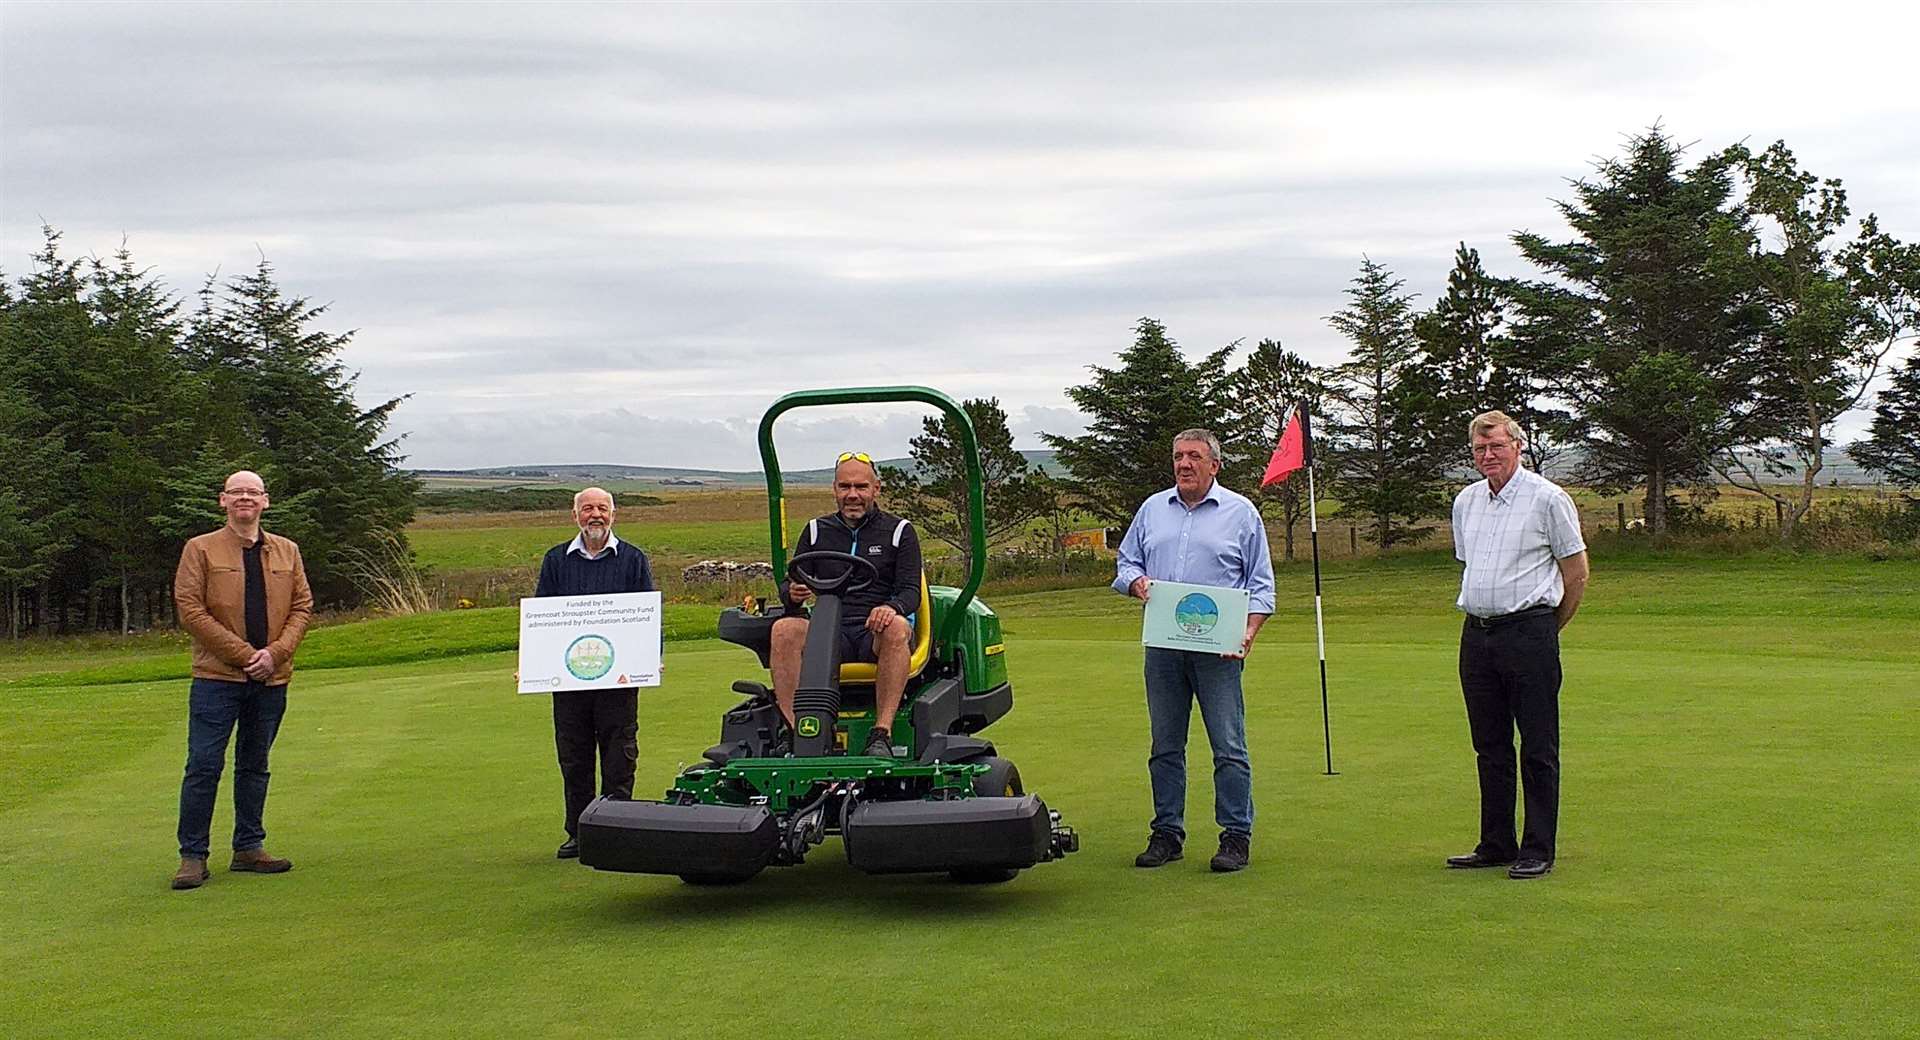 From left: David Shearer of Caithness and North Sutherland Fund; Alan Simmonite, Thurso Golf Club greens convener (holding the Stroupster Community Fund board); Frazer Sparling, Thurso's head greenkeeper; Paul Budden and Peter MacDonald of Baillie Wind Farm Community Benefit Fund.